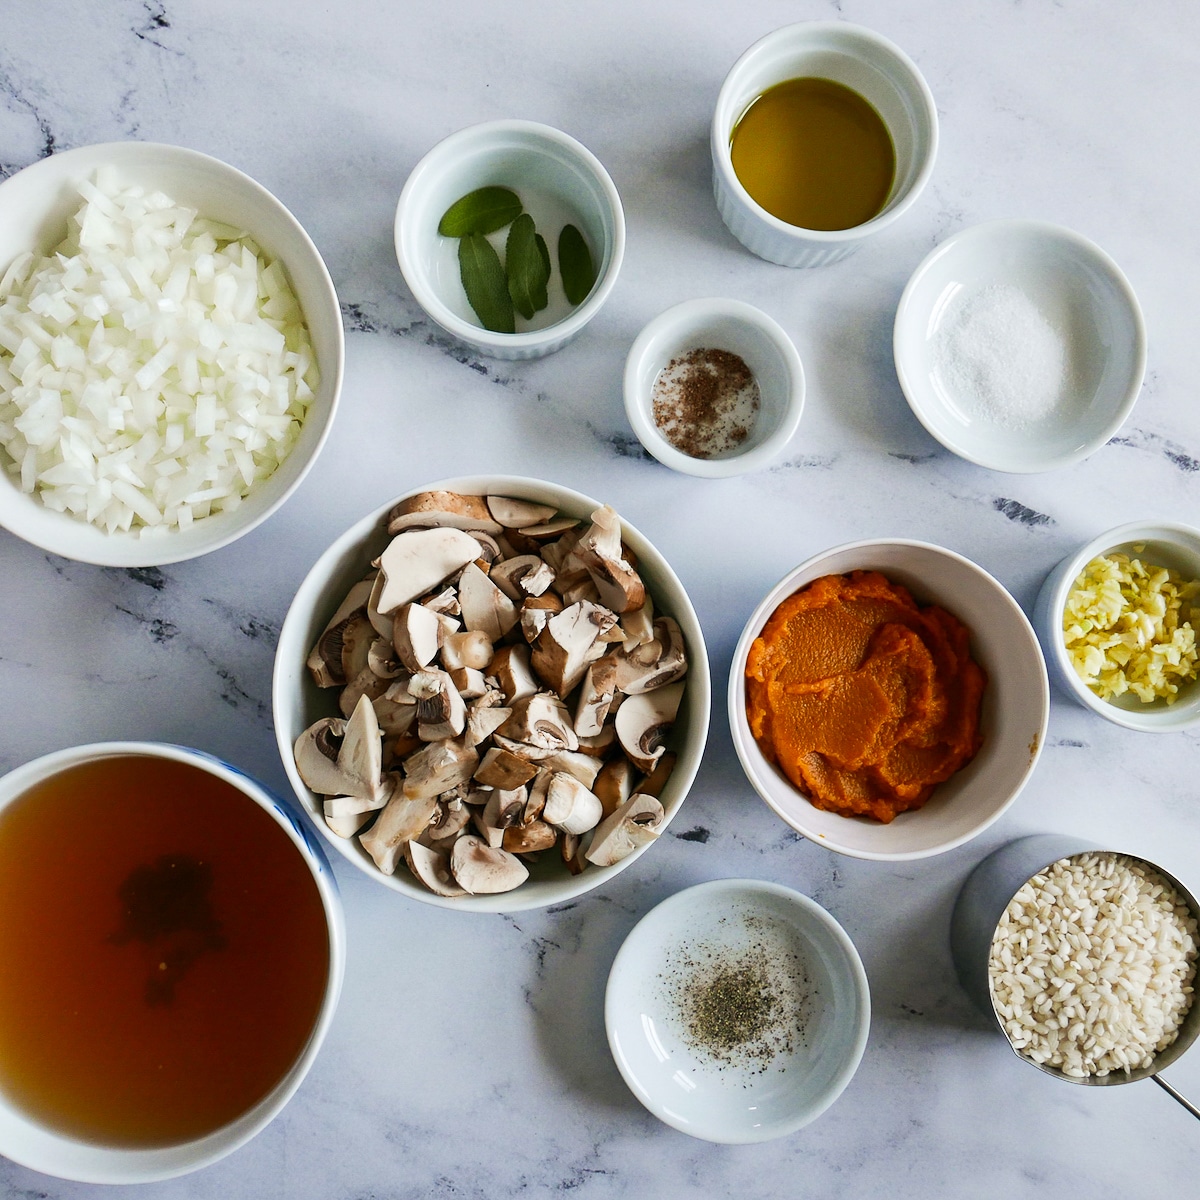 risotto ingredients arranged on a table.